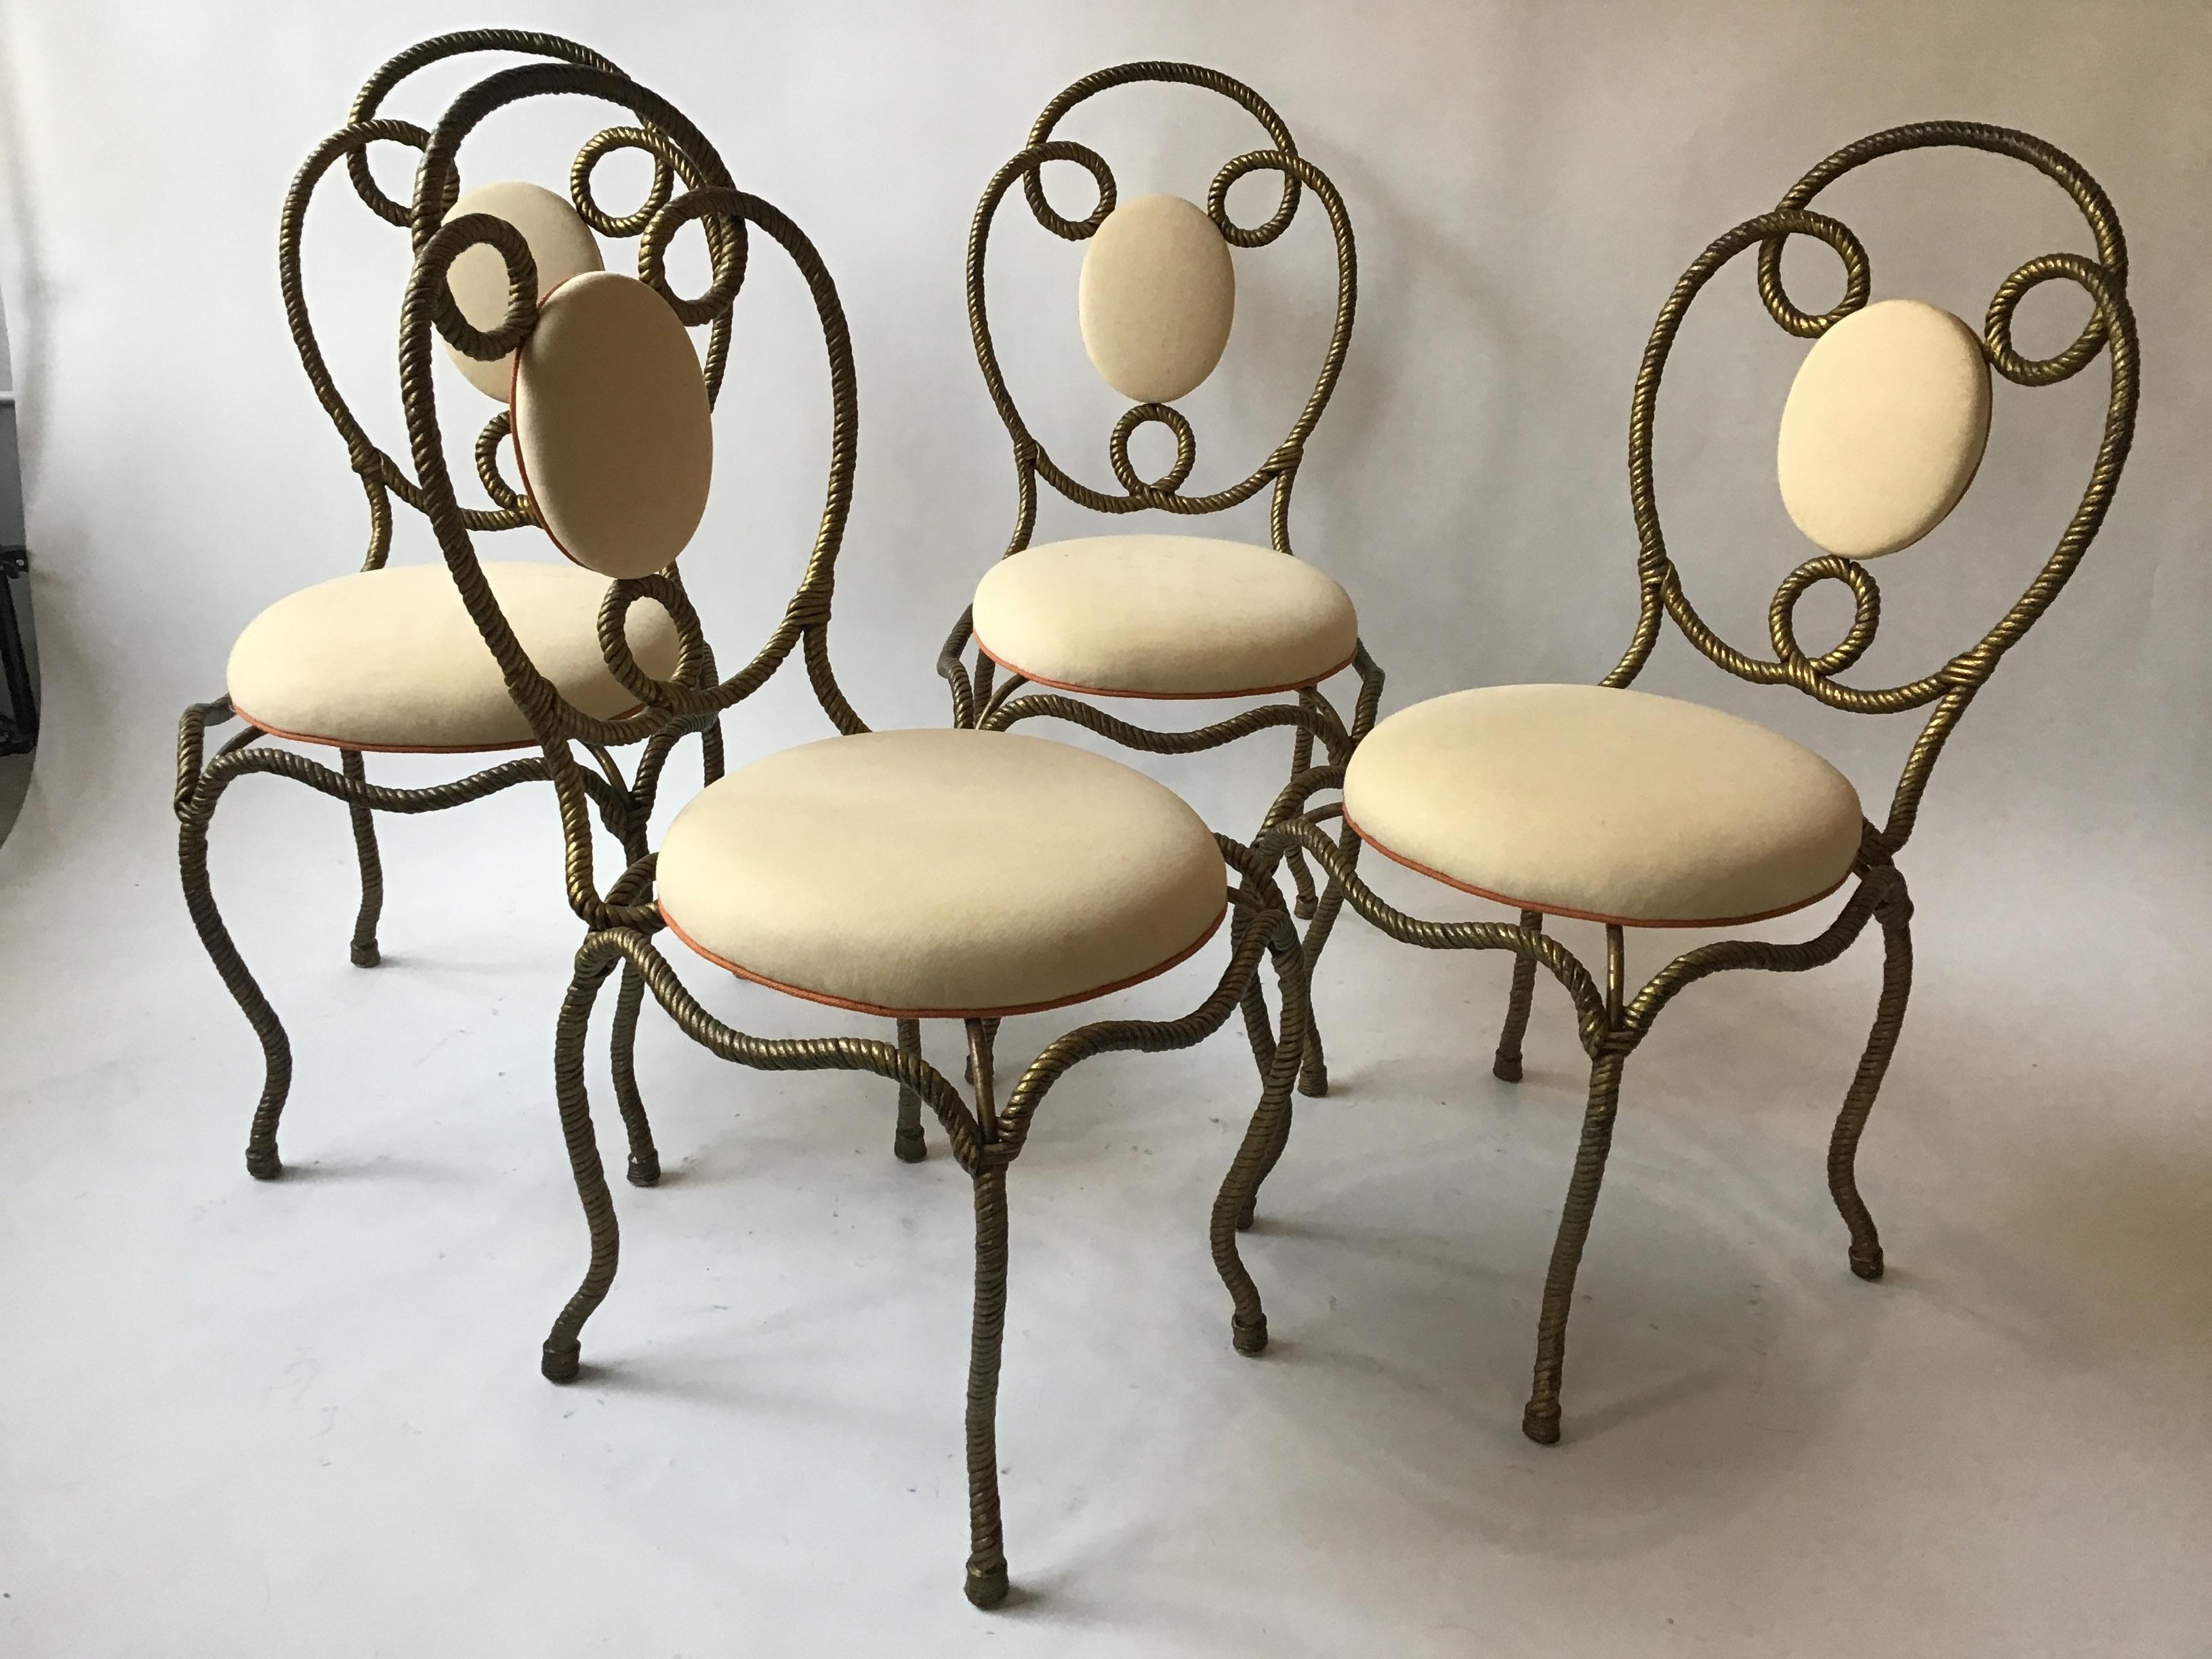 4 Italian 1970s gold iron rope chairs. Original upholstery, needs to be reupholstered.